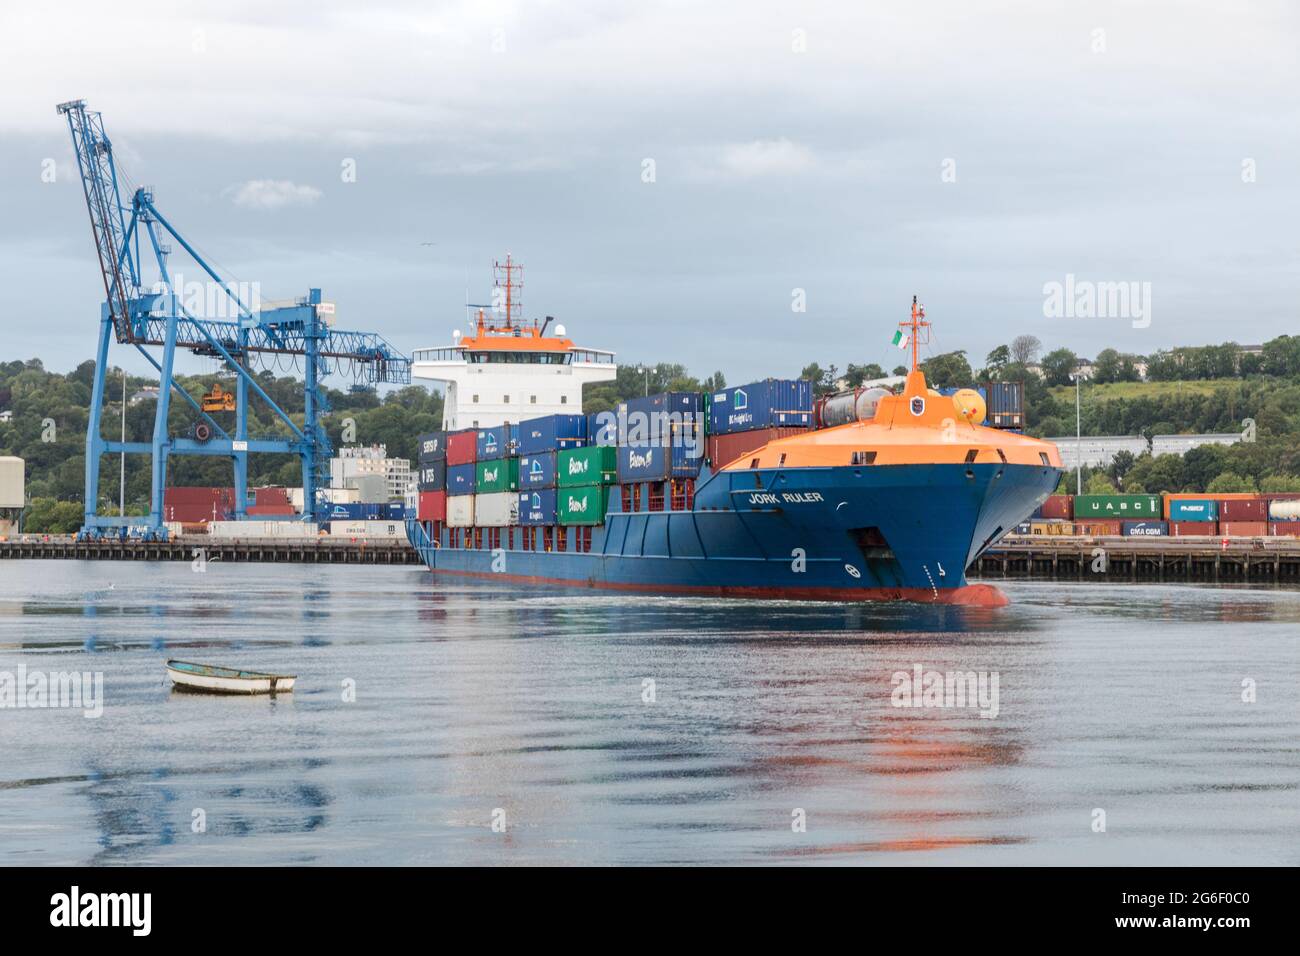 Tivoli, Cork, Ireland. 06th July, 2021. Container ship Jork Ruler performs a 360 degree turning manoeuvre on the River Lee after arriving from Rotterdam at Tivoli docks in Cork City, Ireland. - Picture; David Creedon / Alamy Live News Stock Photo